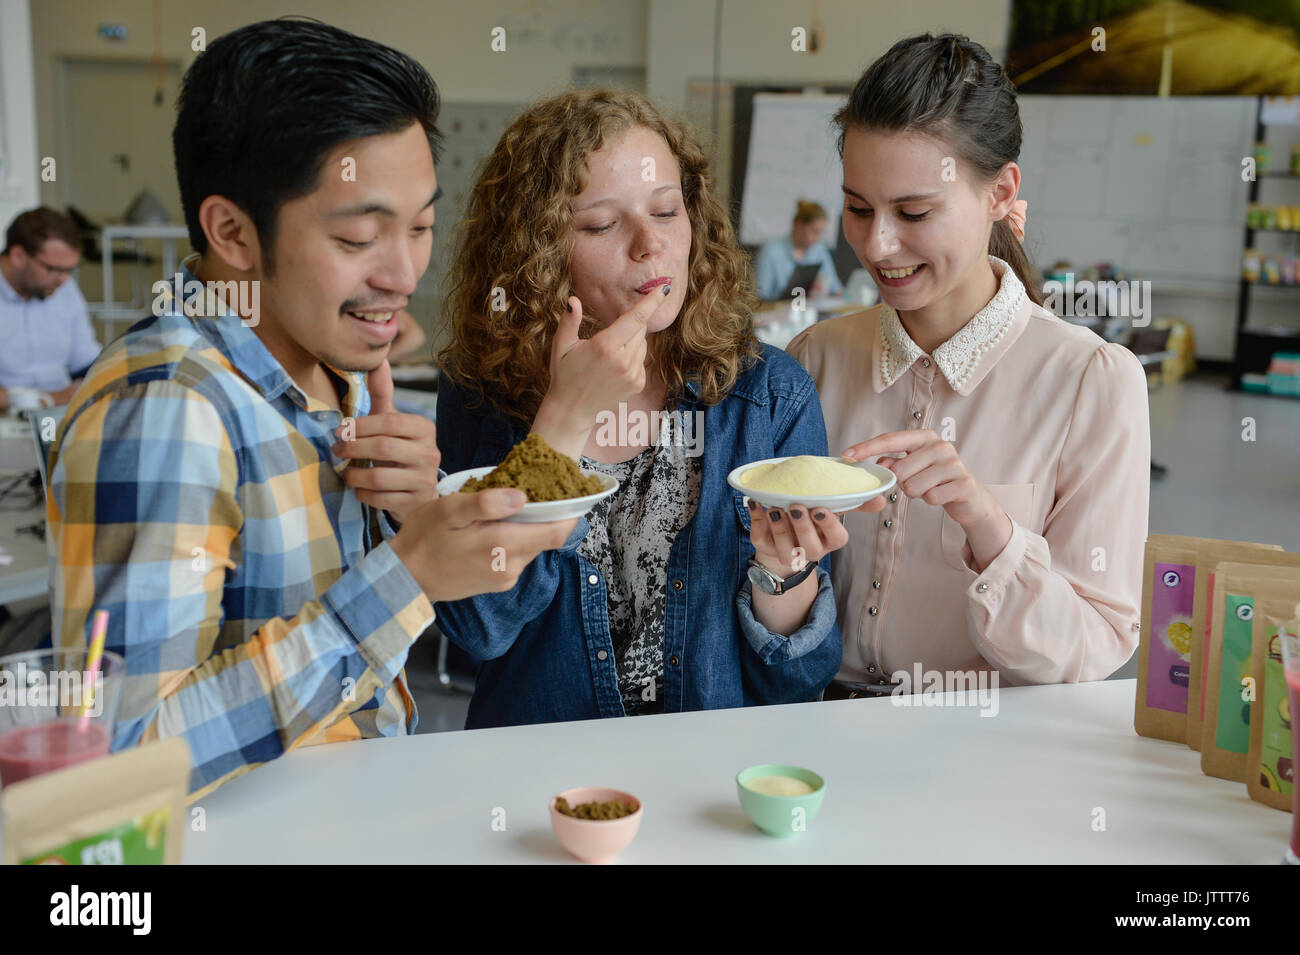 Bremen, Germany. 27th July, 2017. L-R: Gerald Perry Marin, Ada Batazy and Vita Jarolimkova in the start-up centre Kraftwerk in Bremen, Germany, 27 July 2017. The trio are the minds behind FoPo (an abbreviation of Food Powder), a company that processes fruit from farms in the Philippines, Israel and Kenya into freeze-dried powders which can then be shipped to Germany more conveniently. Photo: Karsten Klama/dpa/Alamy Live News Stock Photo